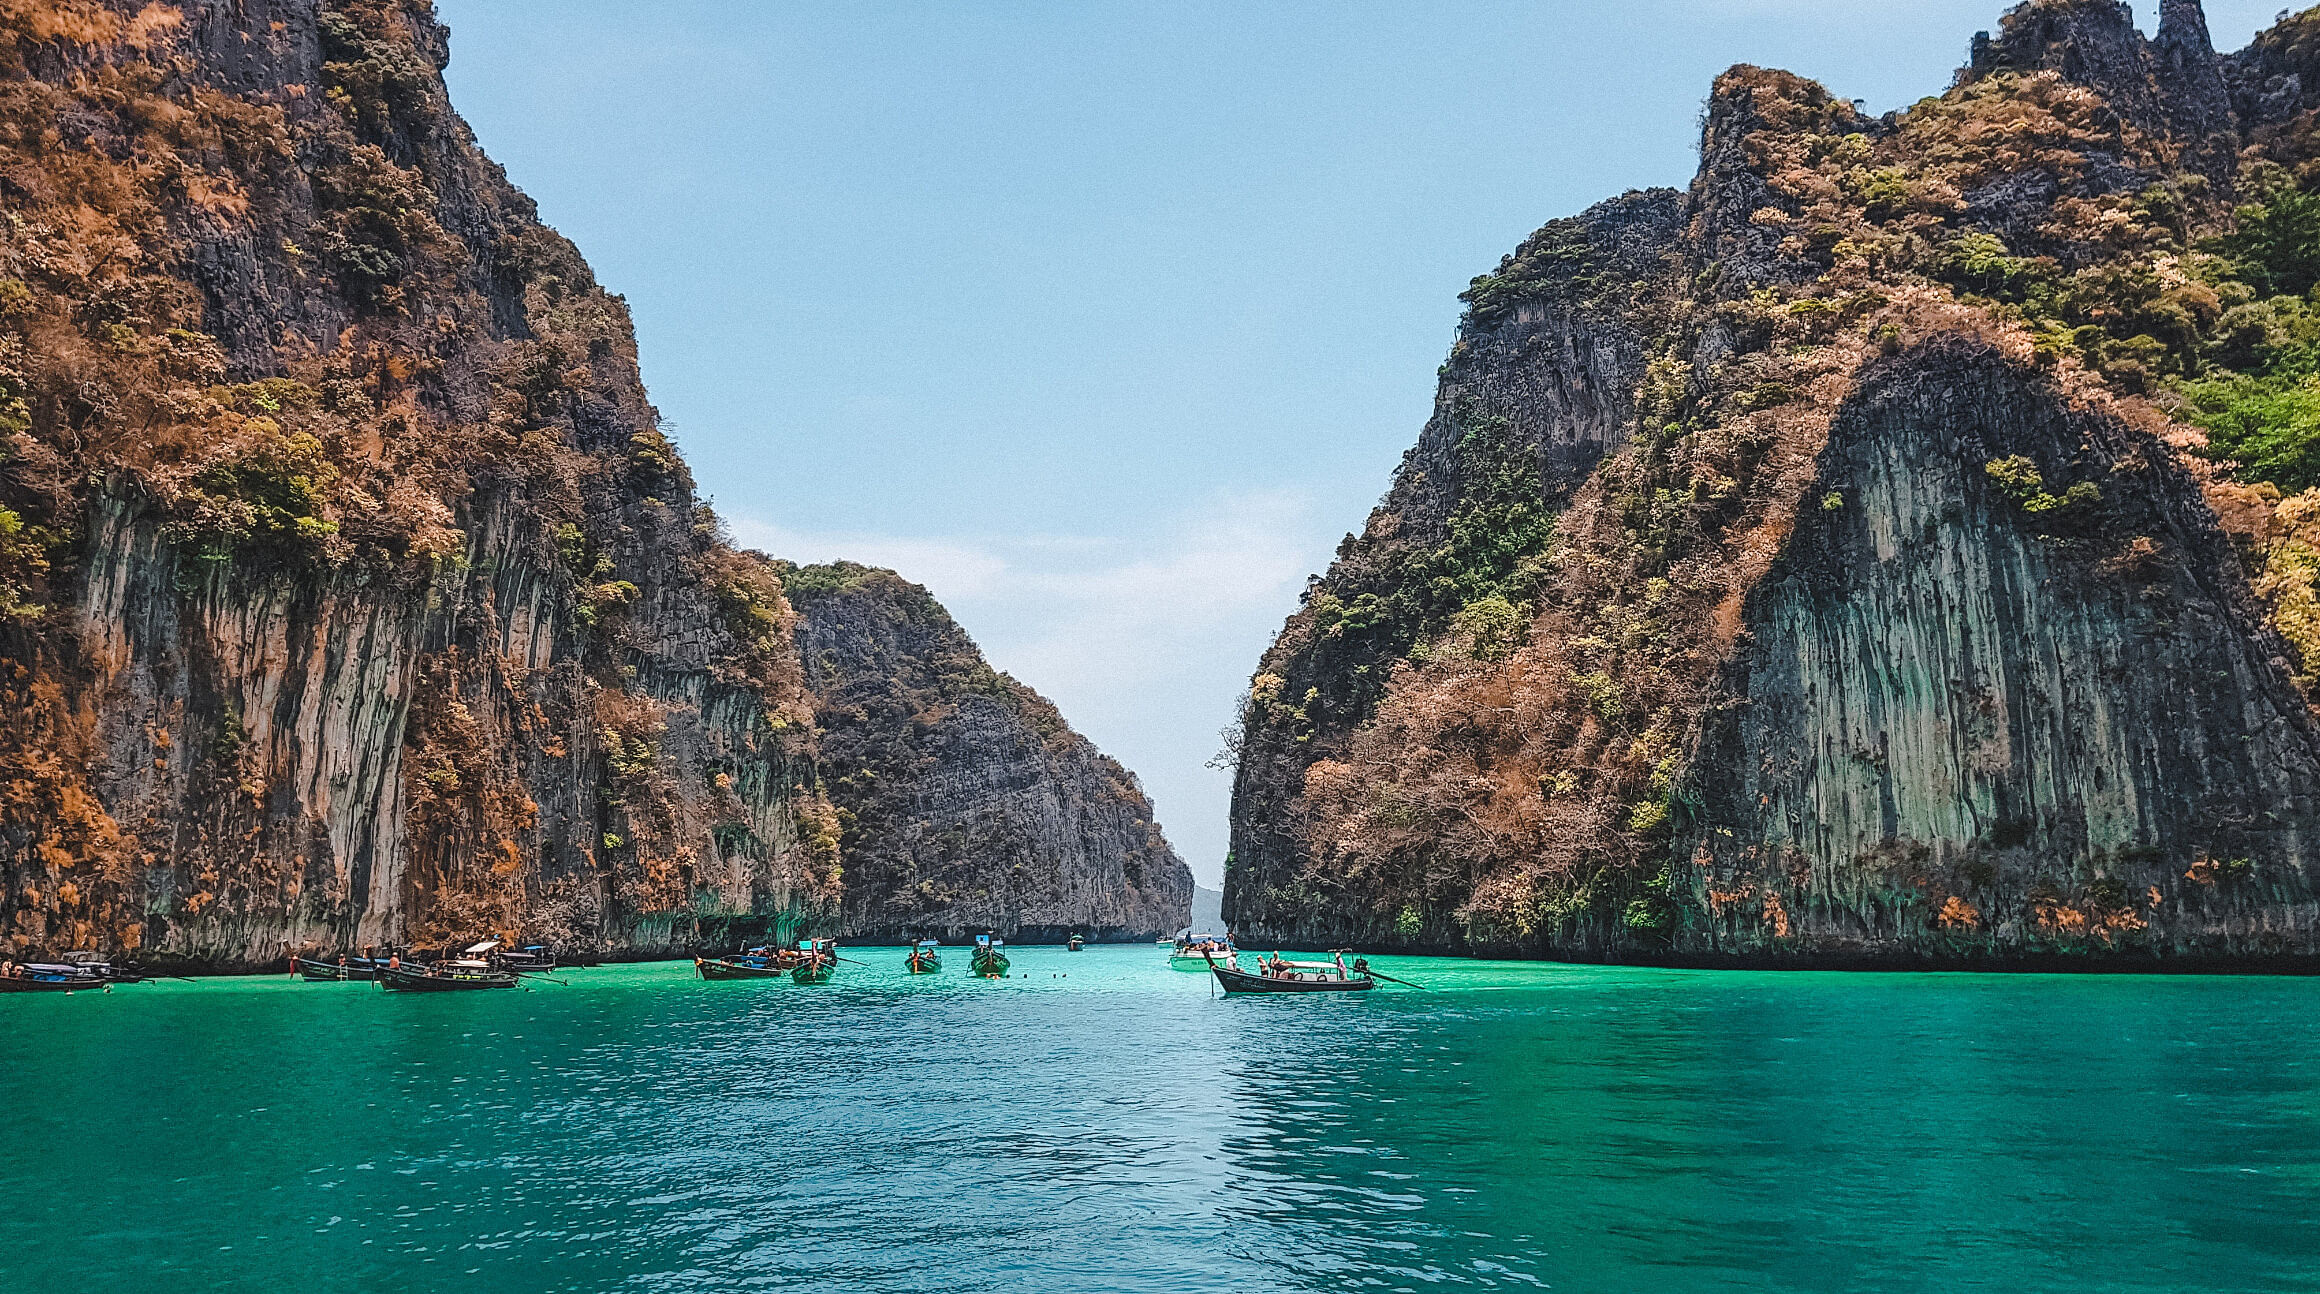 Boats and islands in the Gulf of Thailand 